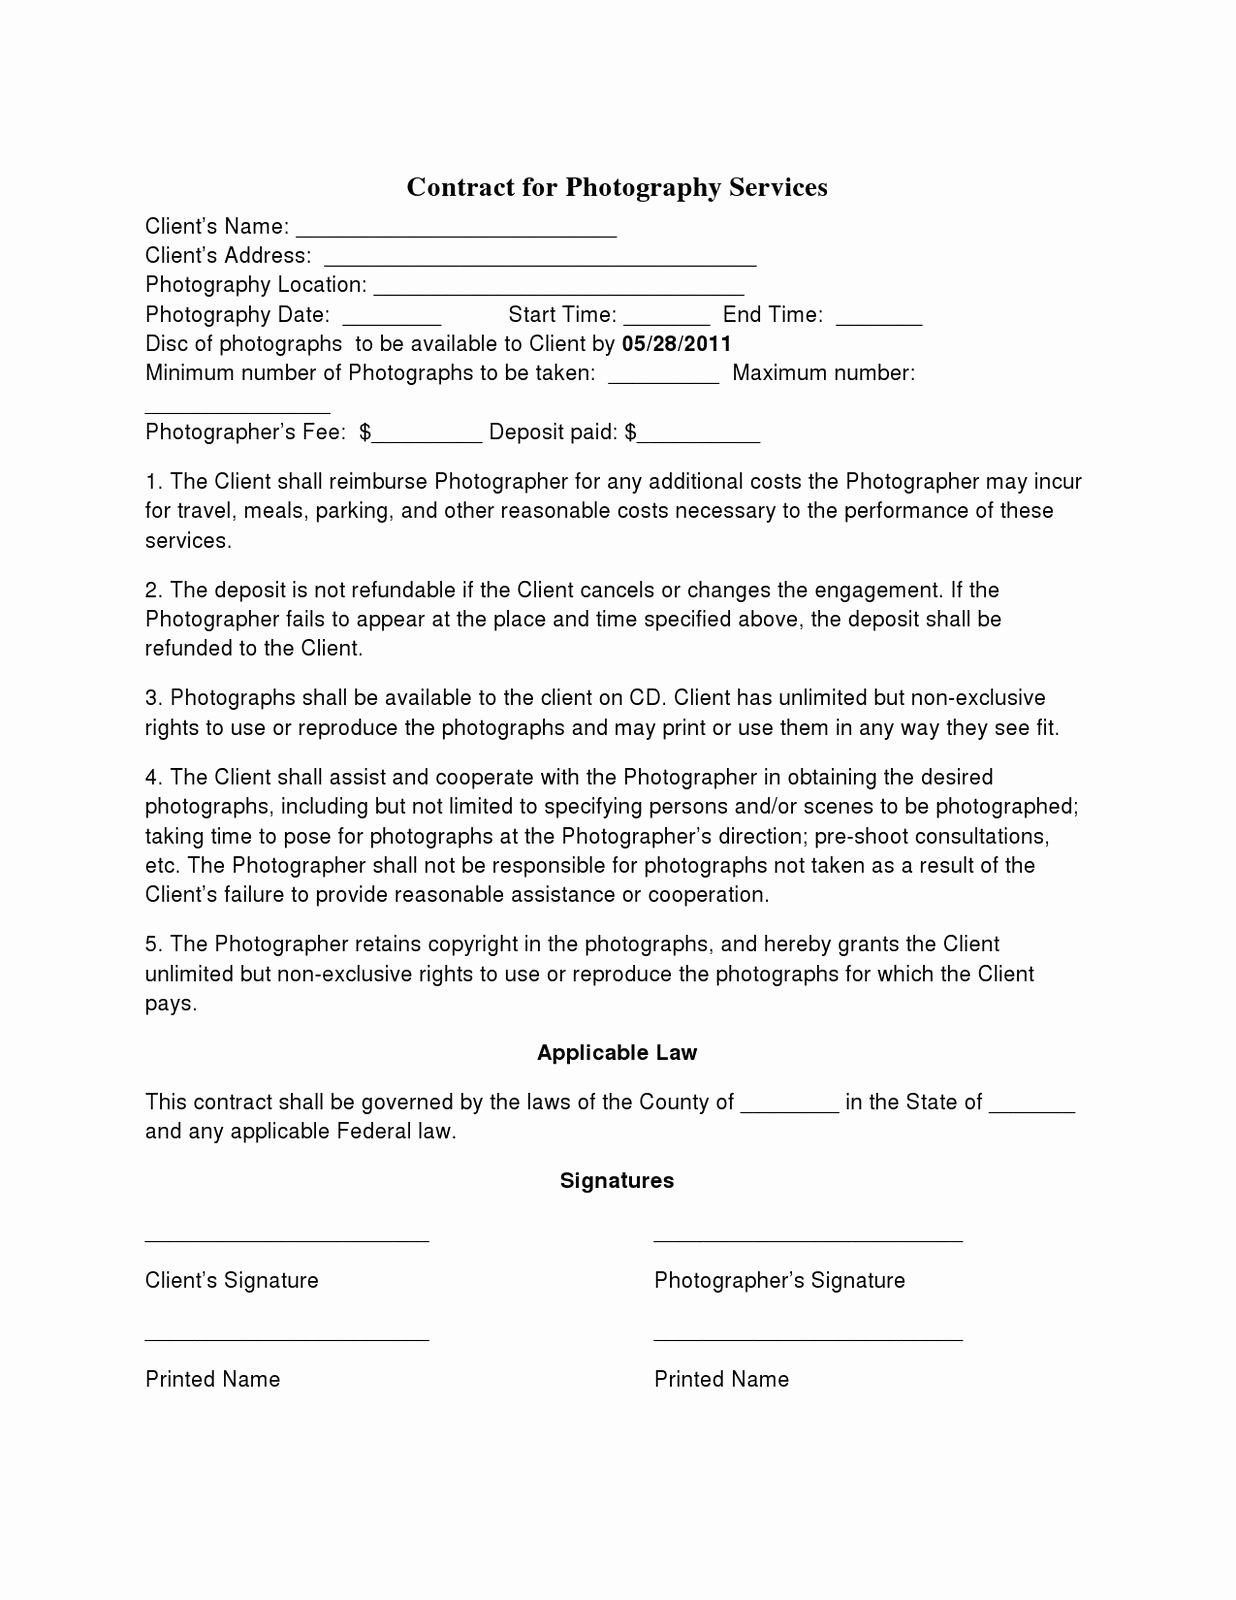 basic wedding graphy contracts